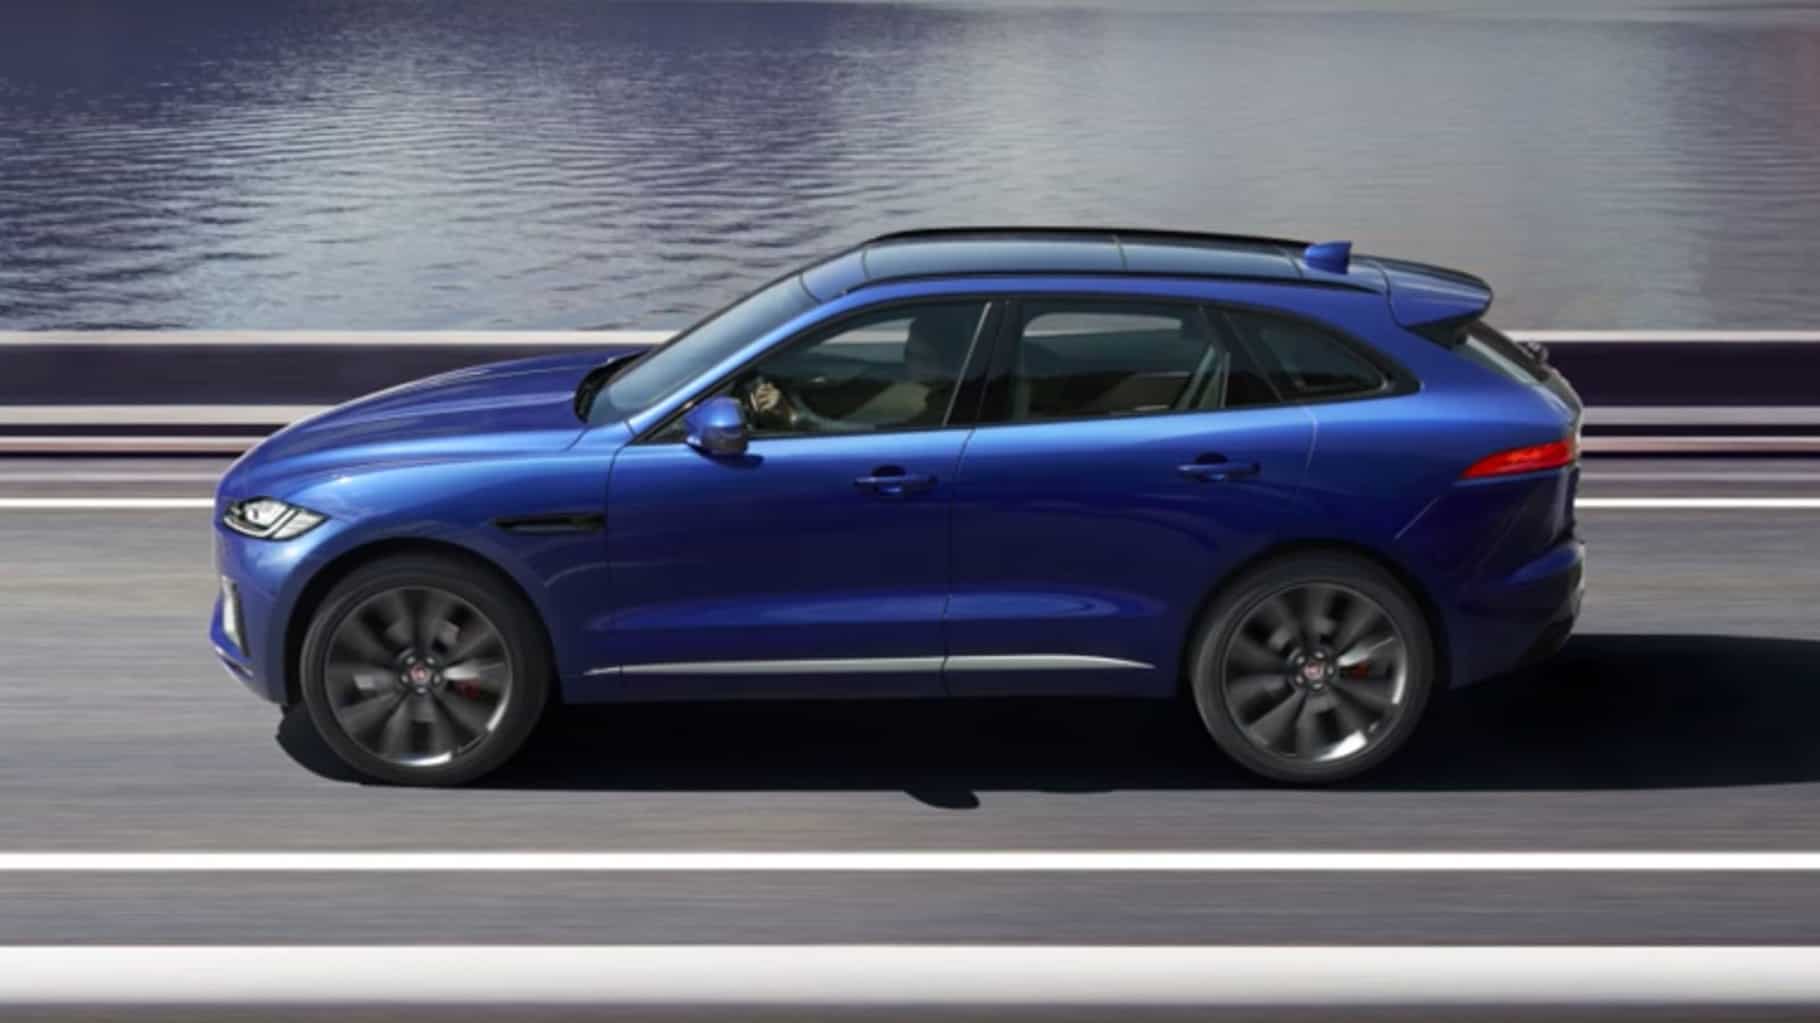 A jaguar F-Pace driving along a road by the sea.